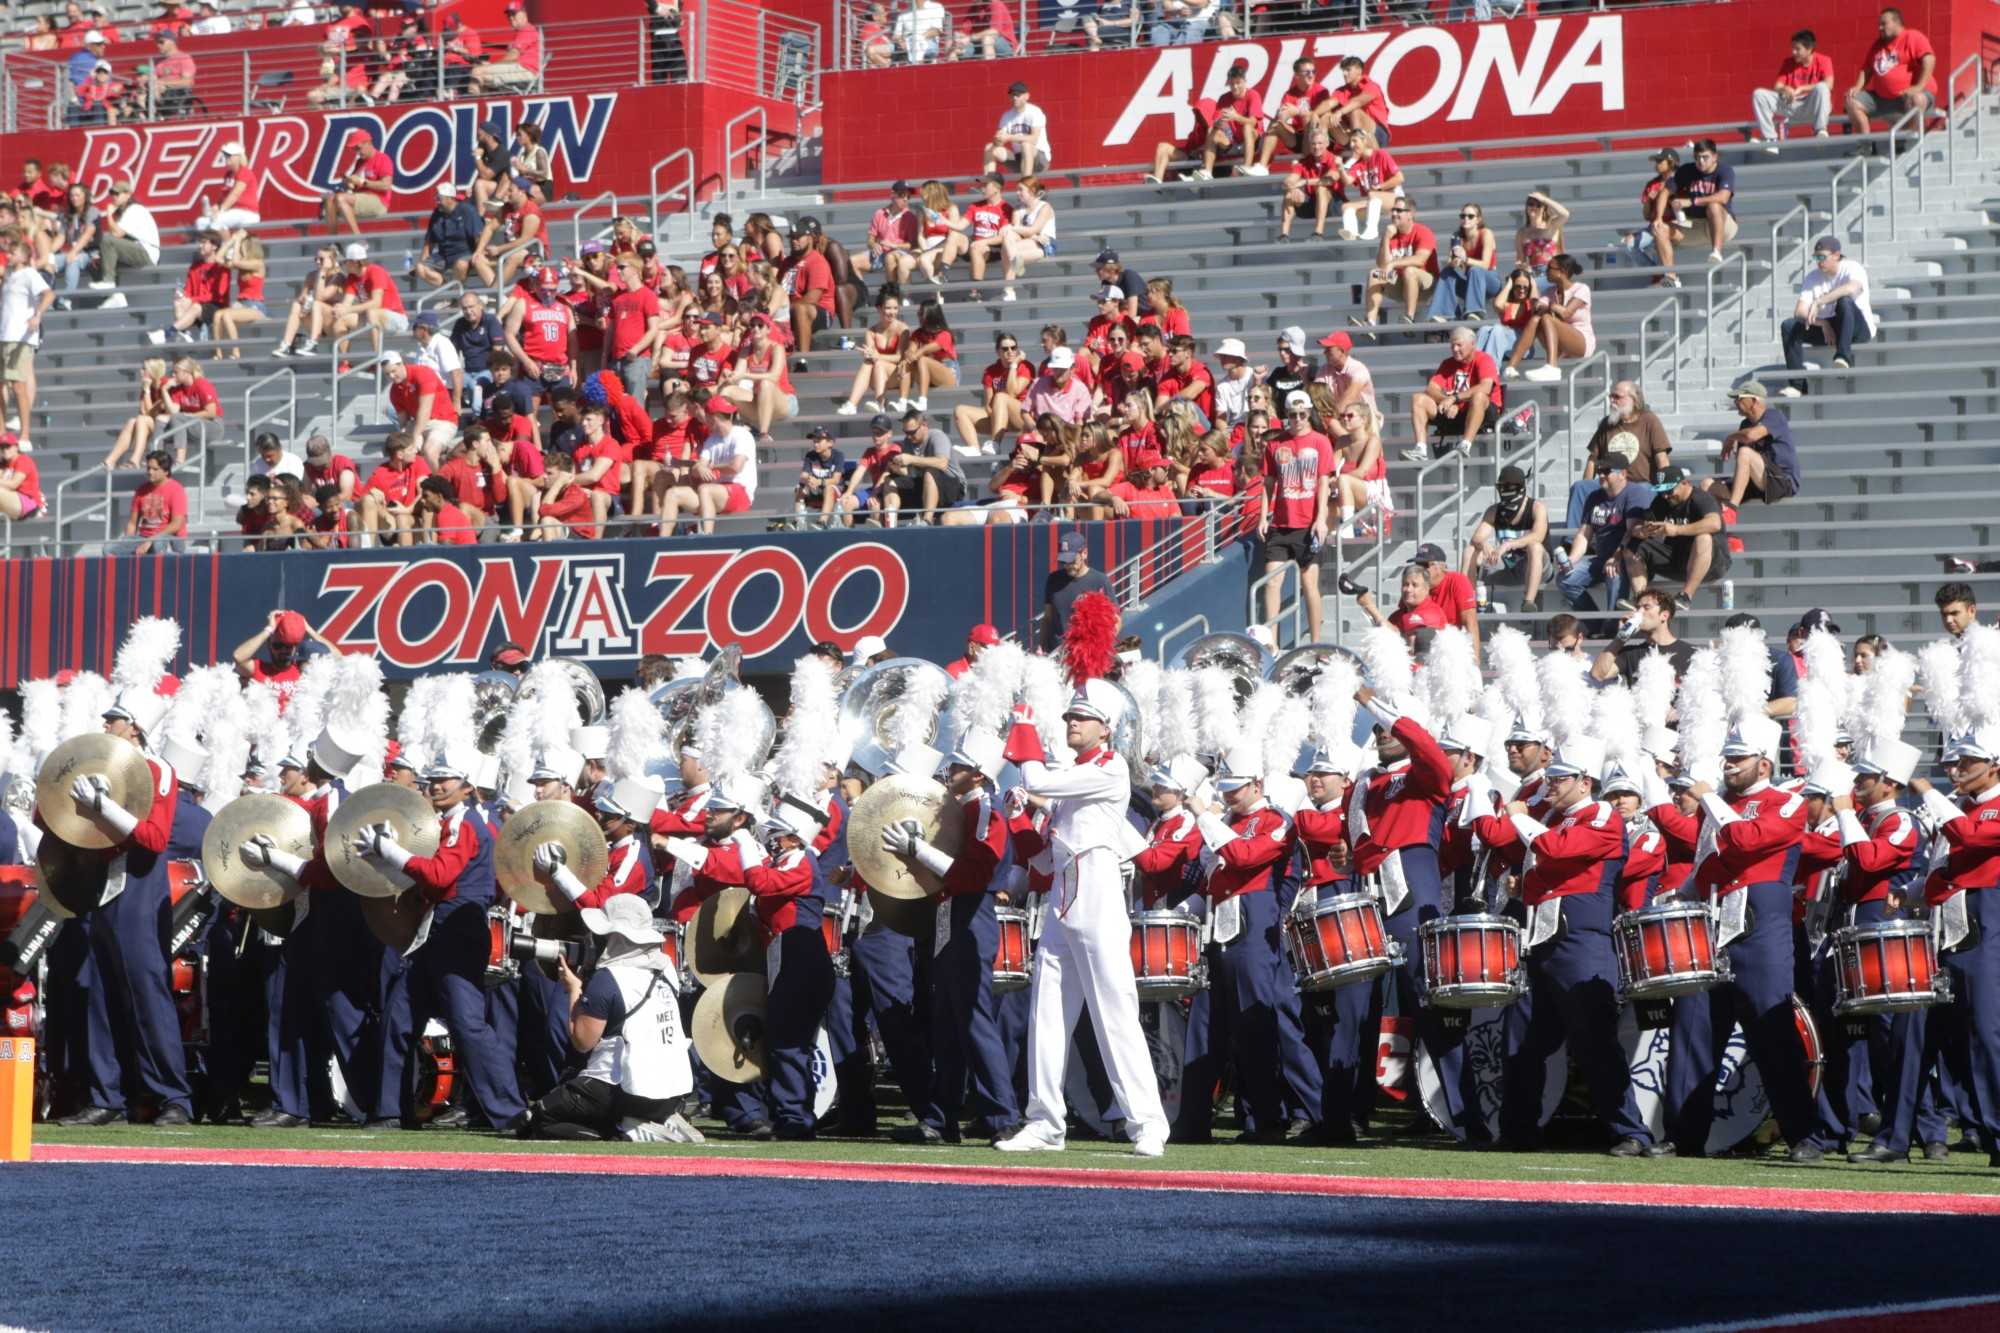 The Pride of Arizona marching band plays at a football game on Nov. 6 at Arizona Stadium. The day marked the first win for the team since 2019.